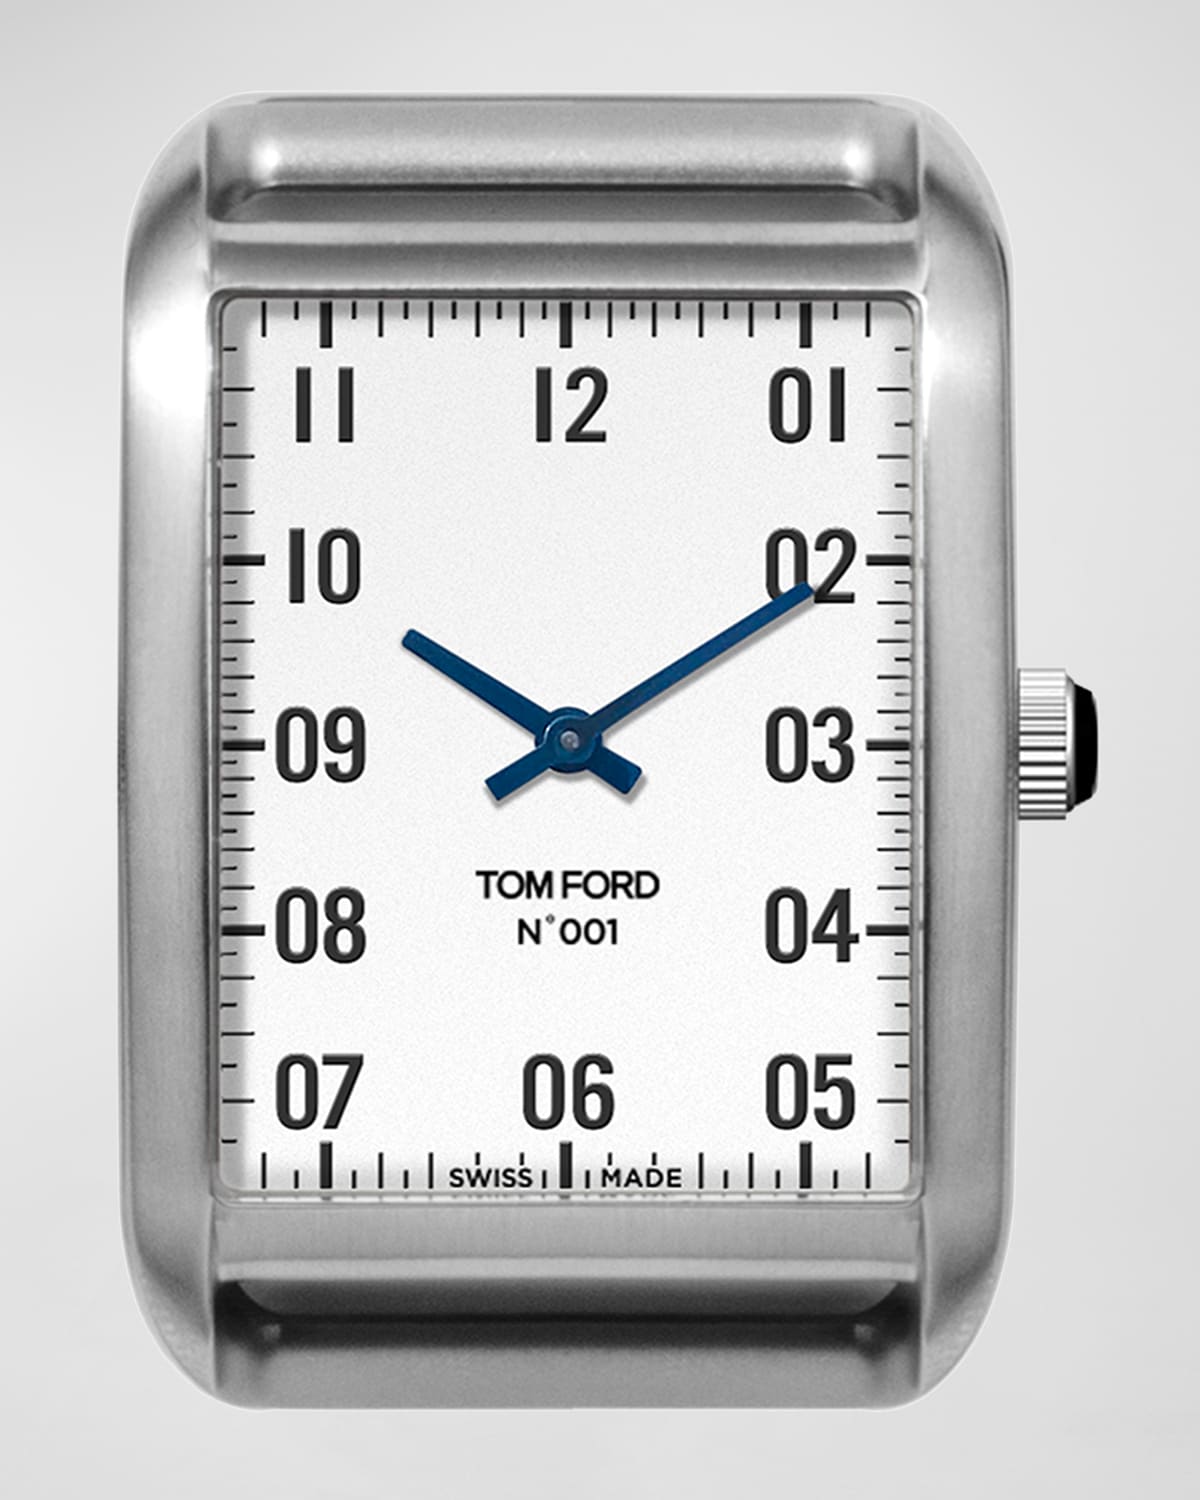 Brushed Stainless Steel Case, White Dial, Medium